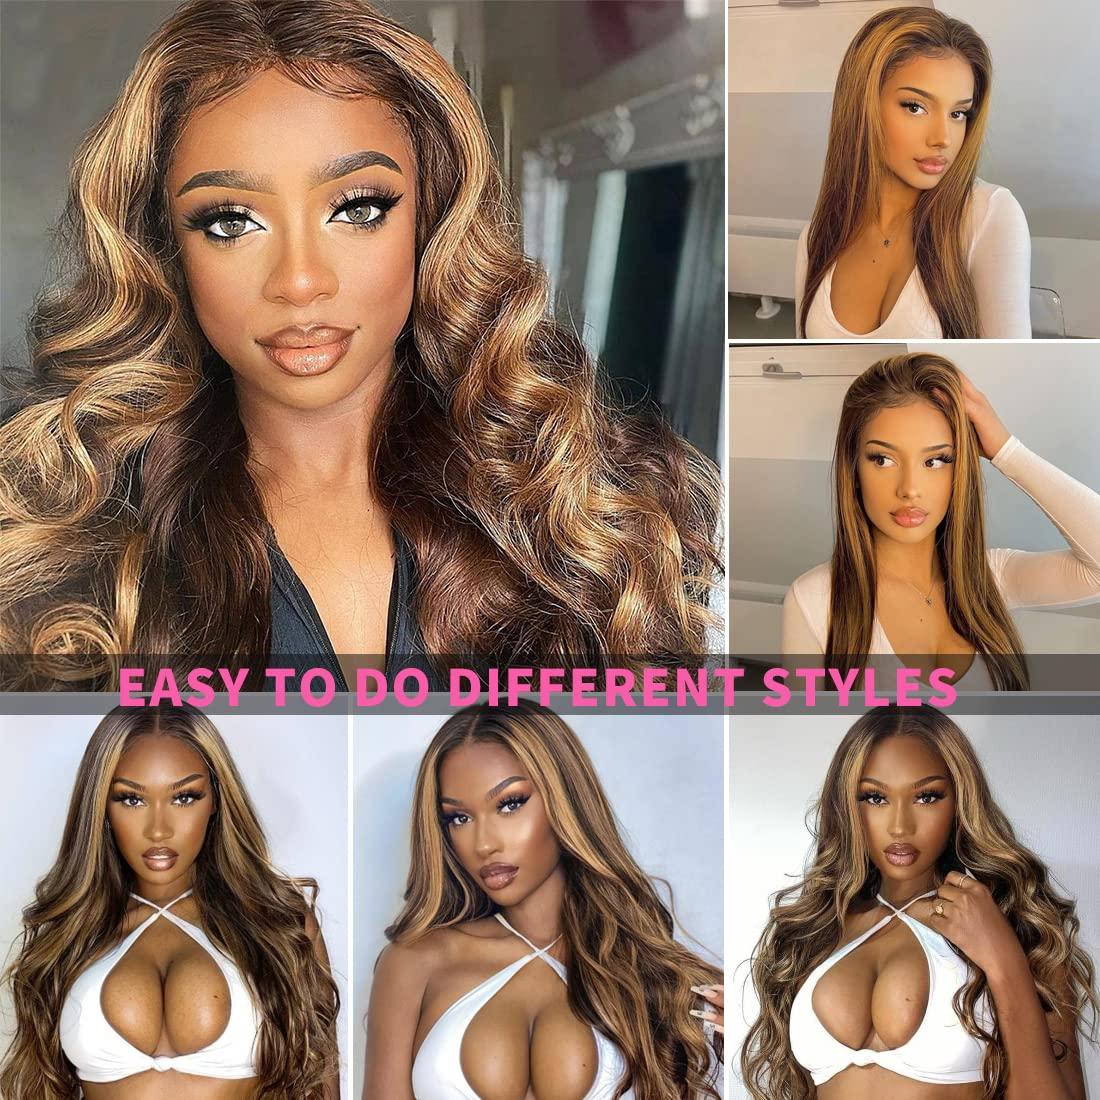 Lace Front Wigs Long Human Hair Pre Plucked Brown Mixed Blonde